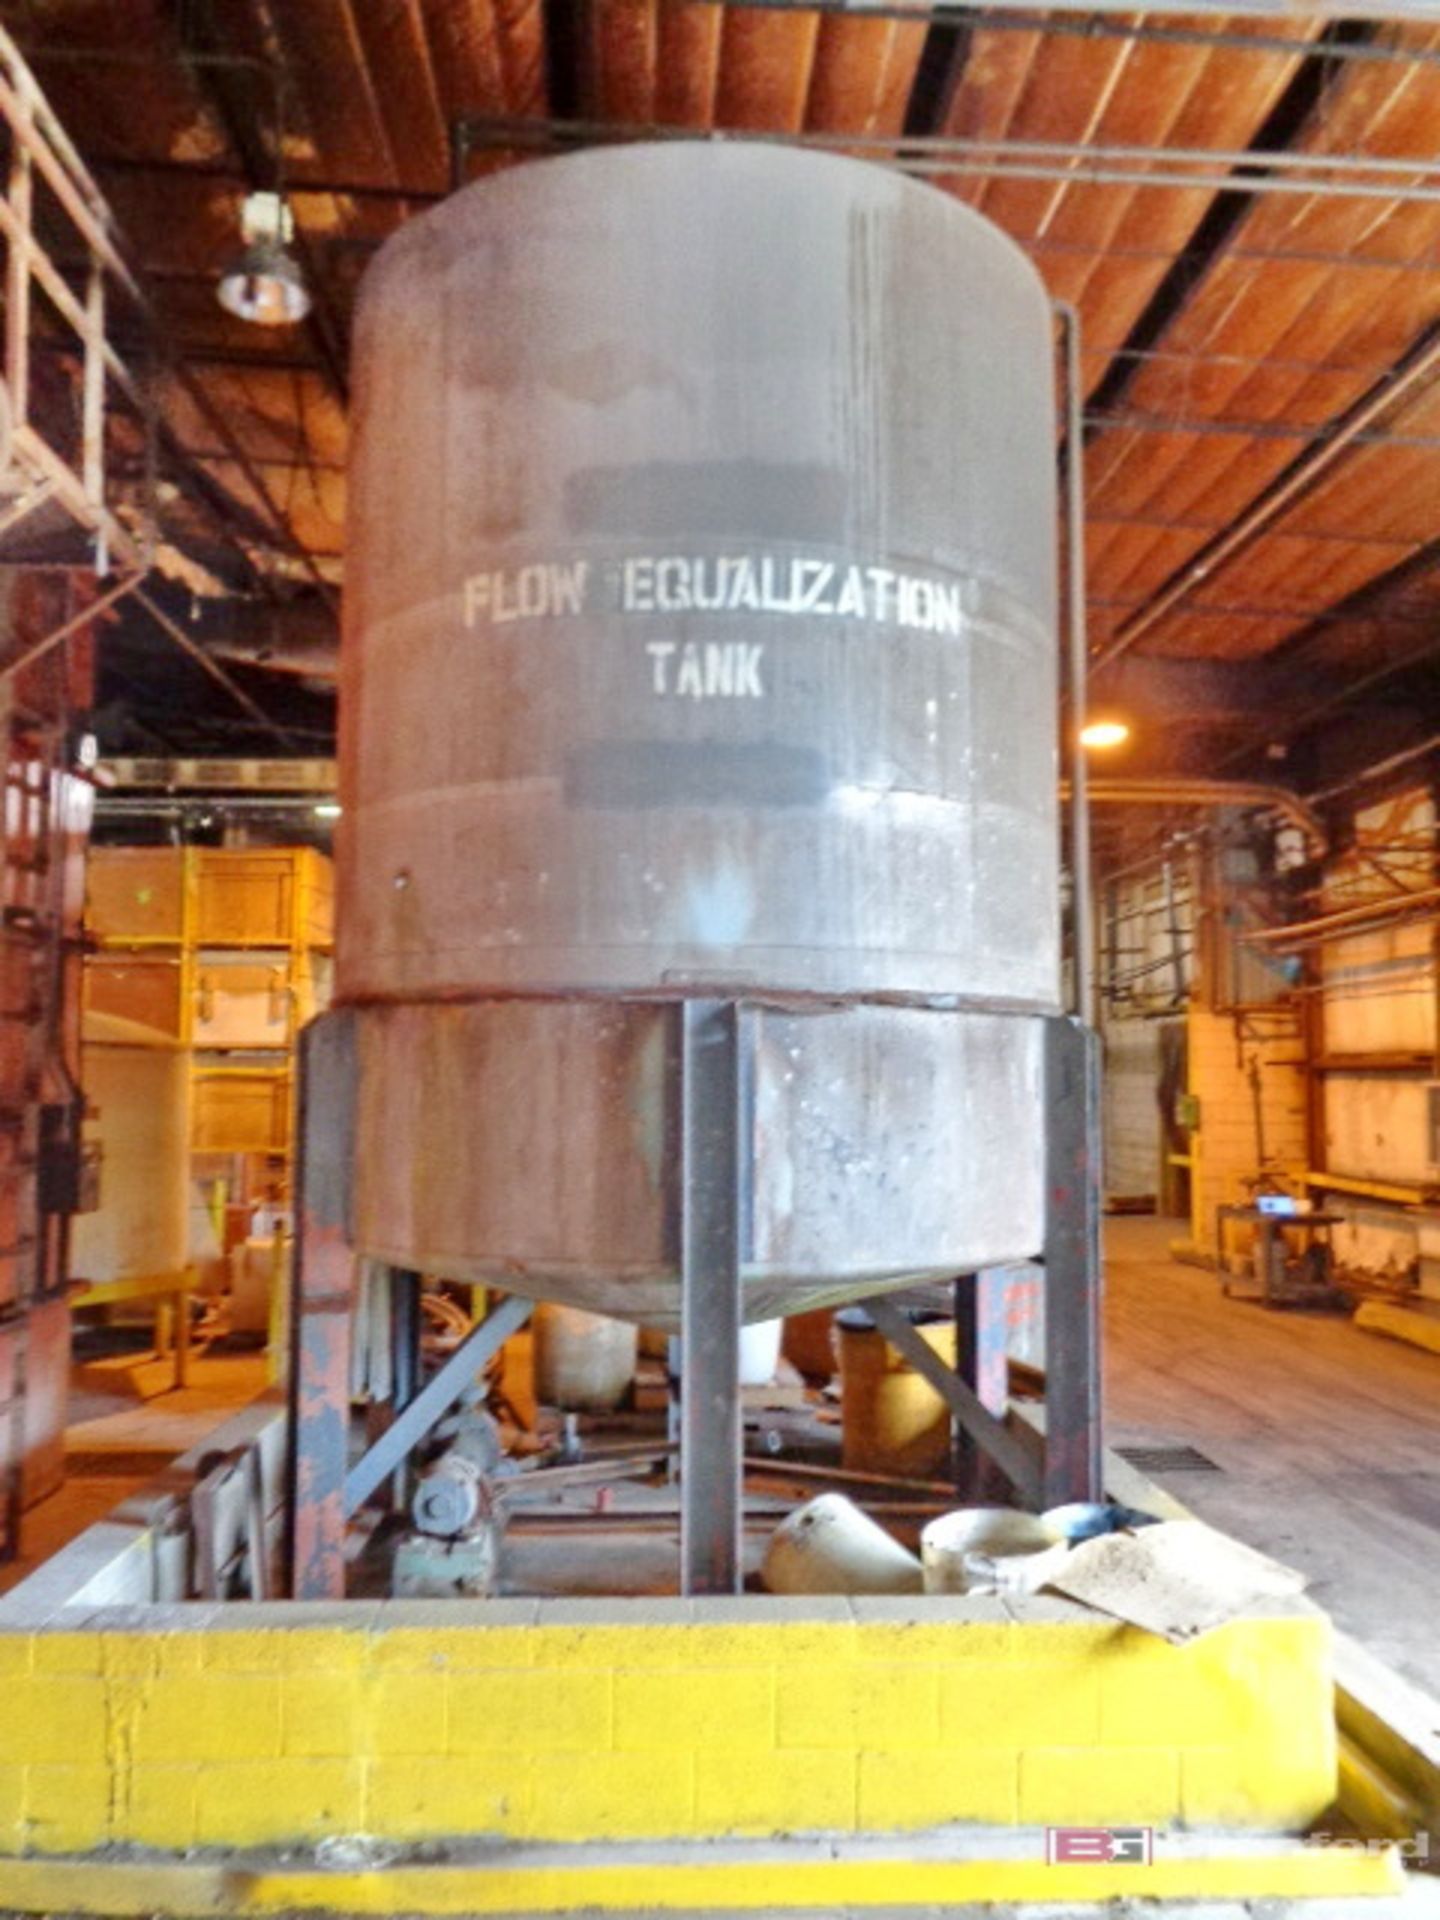 Stainless Steel Flow Equalization Tank - Image 2 of 3